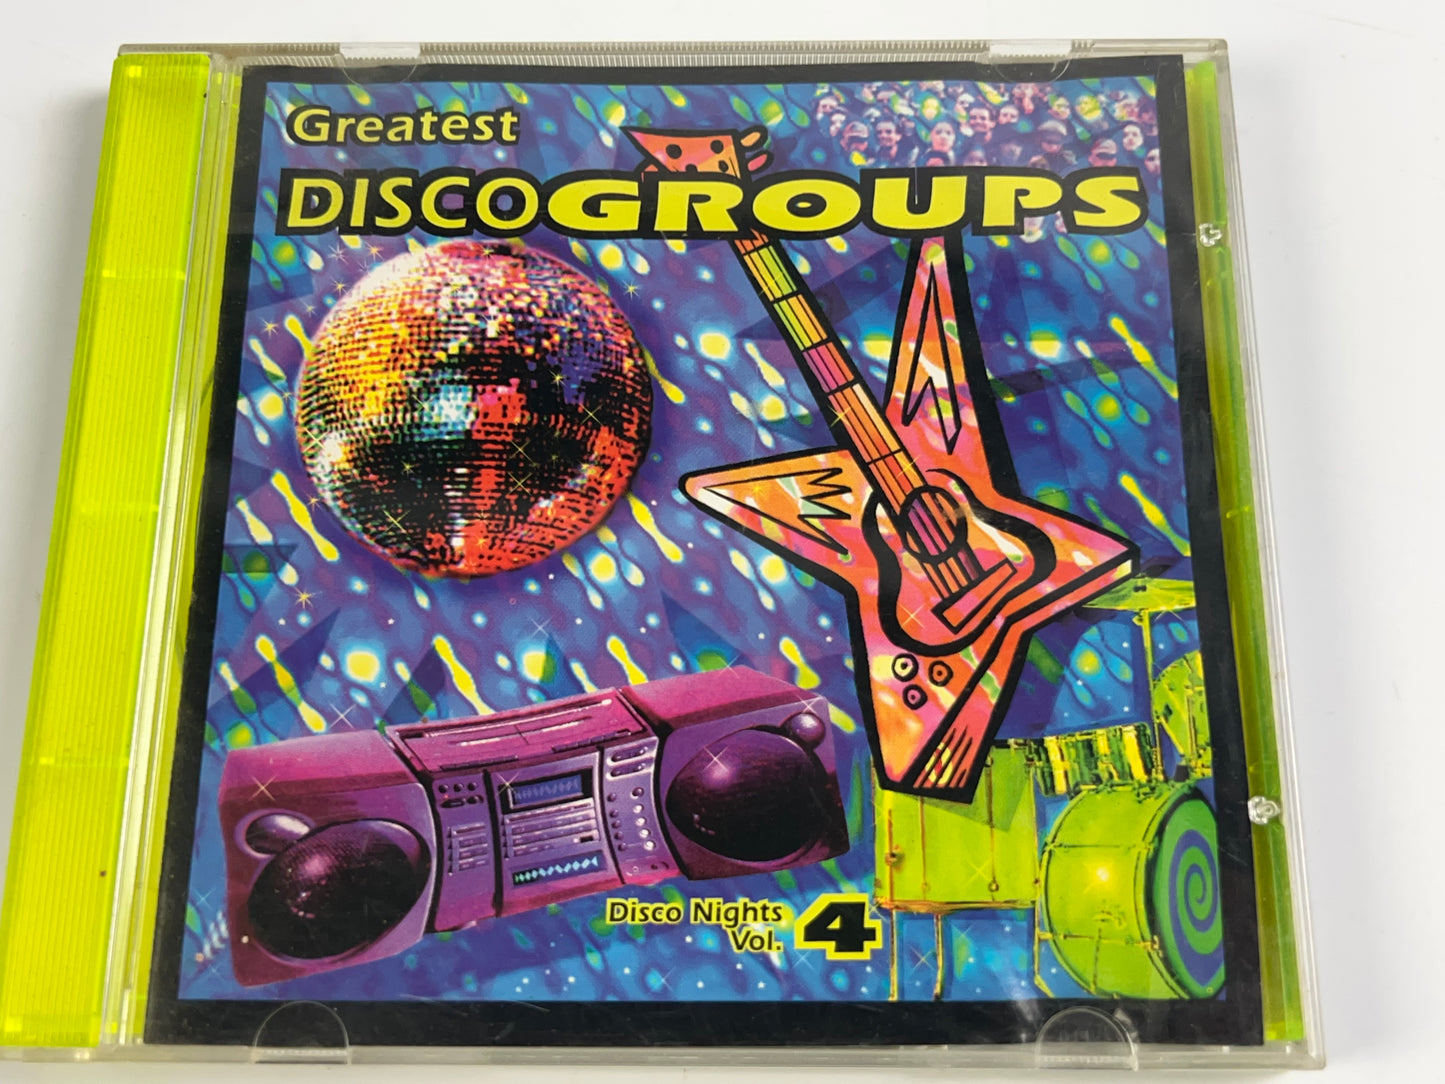 Disco Nights, Vol. 4: Disco Groups by Various Artists (CD, 1994, Rebound